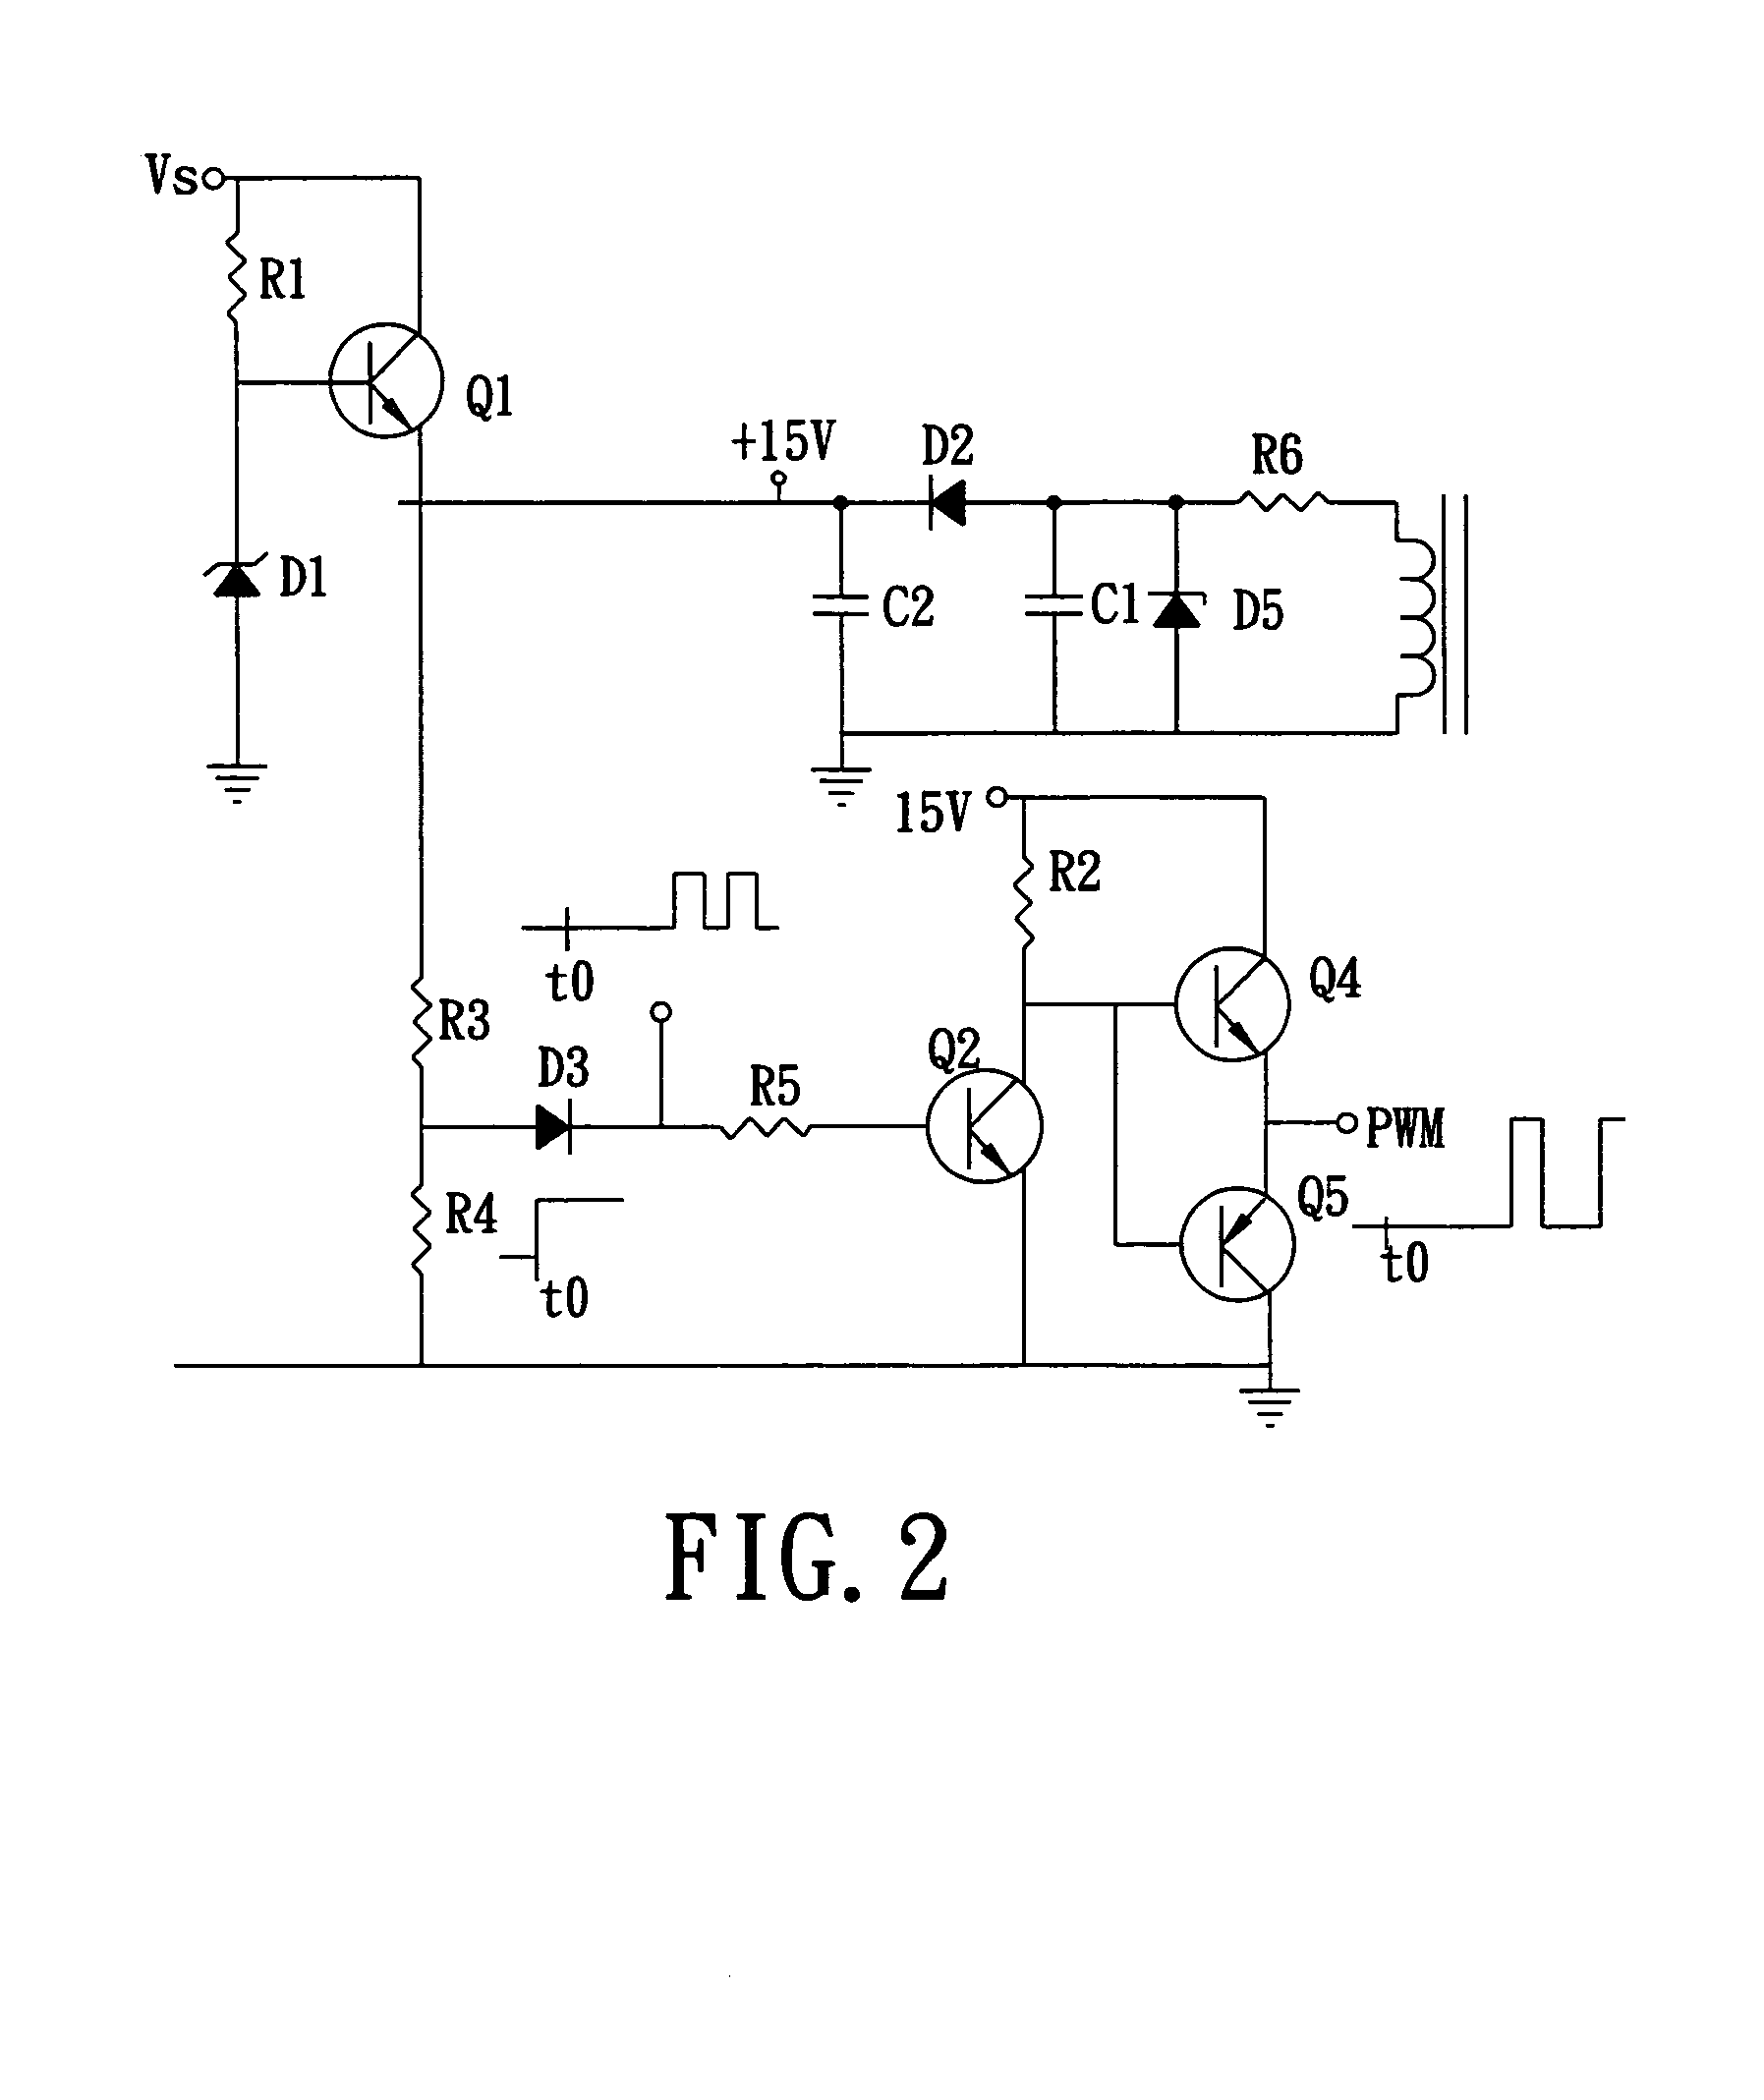 Self-sourcing exercise bike with a linear digital control magnetic resistance braking apparatus